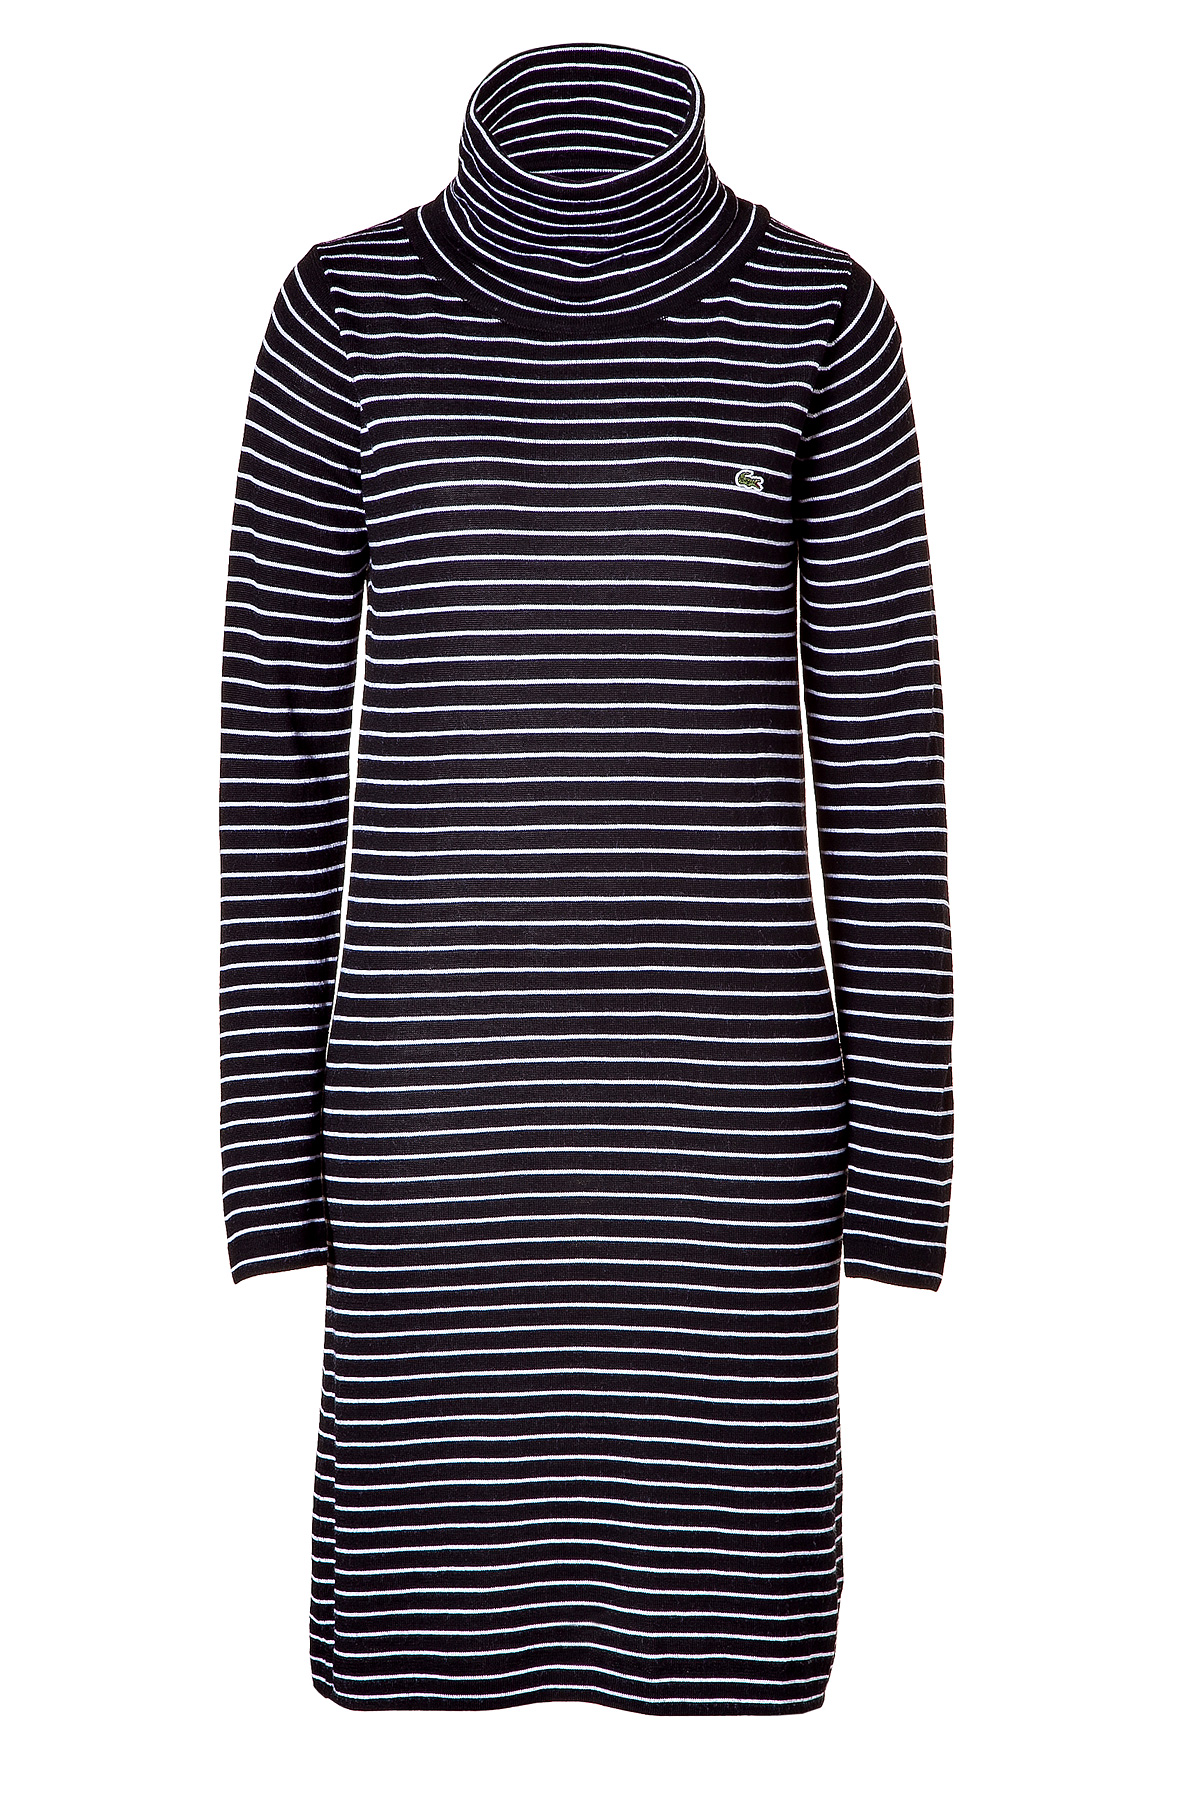 Lacoste Black and White Striped Turtleneck Dress in Black | Lyst